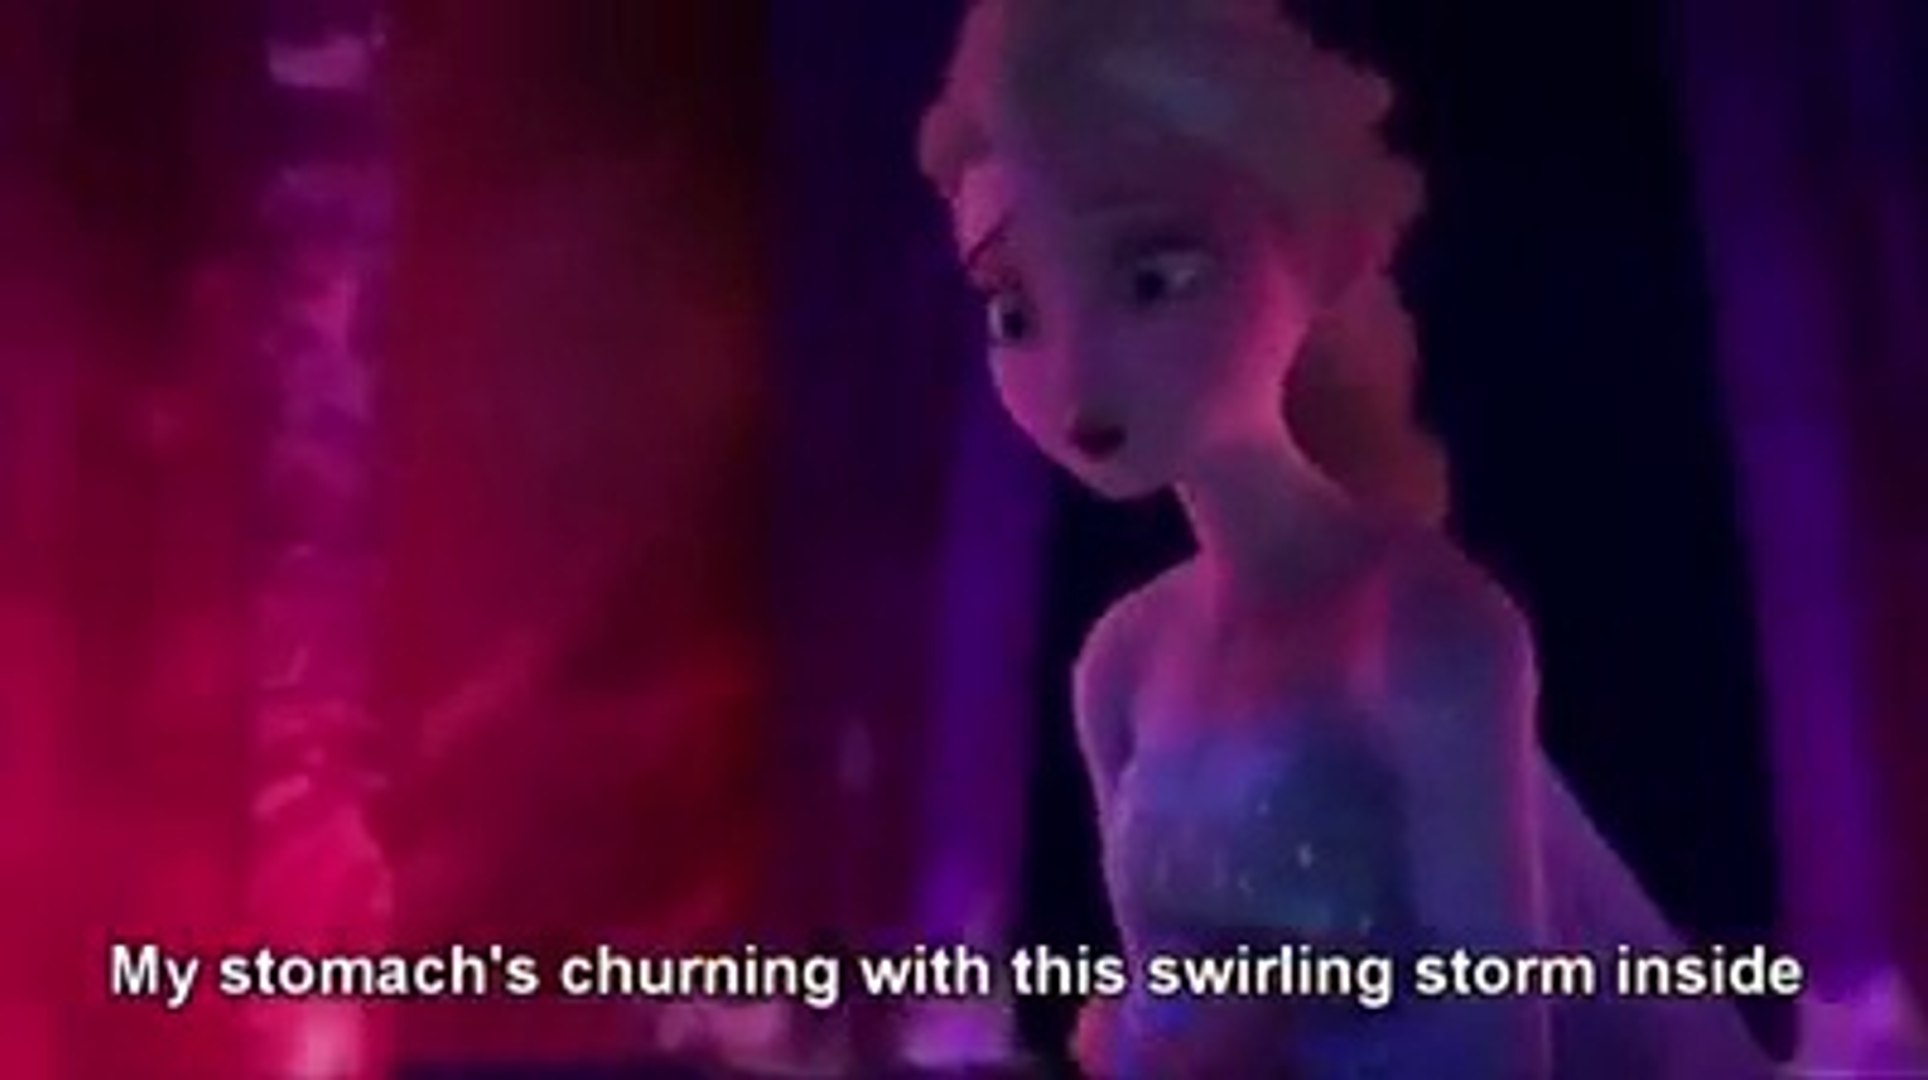 parody frozen song hilarious !! watch & laugh - video Dailymotion